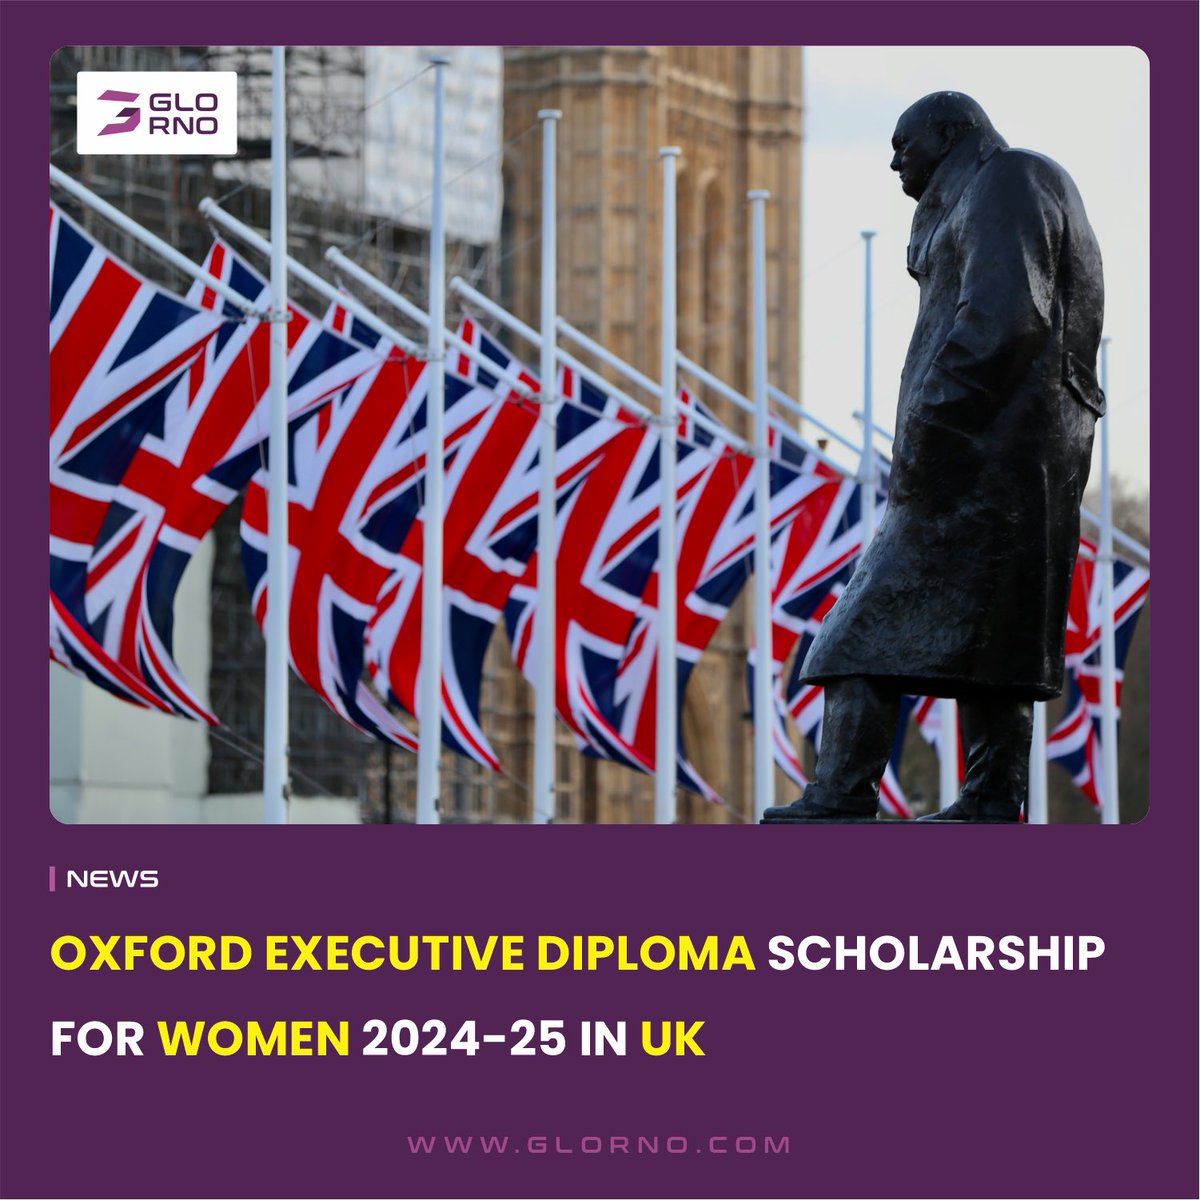 🌟 Great news! The Oxford Executive Diploma Scholarship for Women 2024-25 in the UK is now open! Don't miss this opportunity to advance your career. Apply now! glorno.com/index.php/2024…

#OxfordScholarship #WomenLeaders #UKEducation 🎓🇬🇧